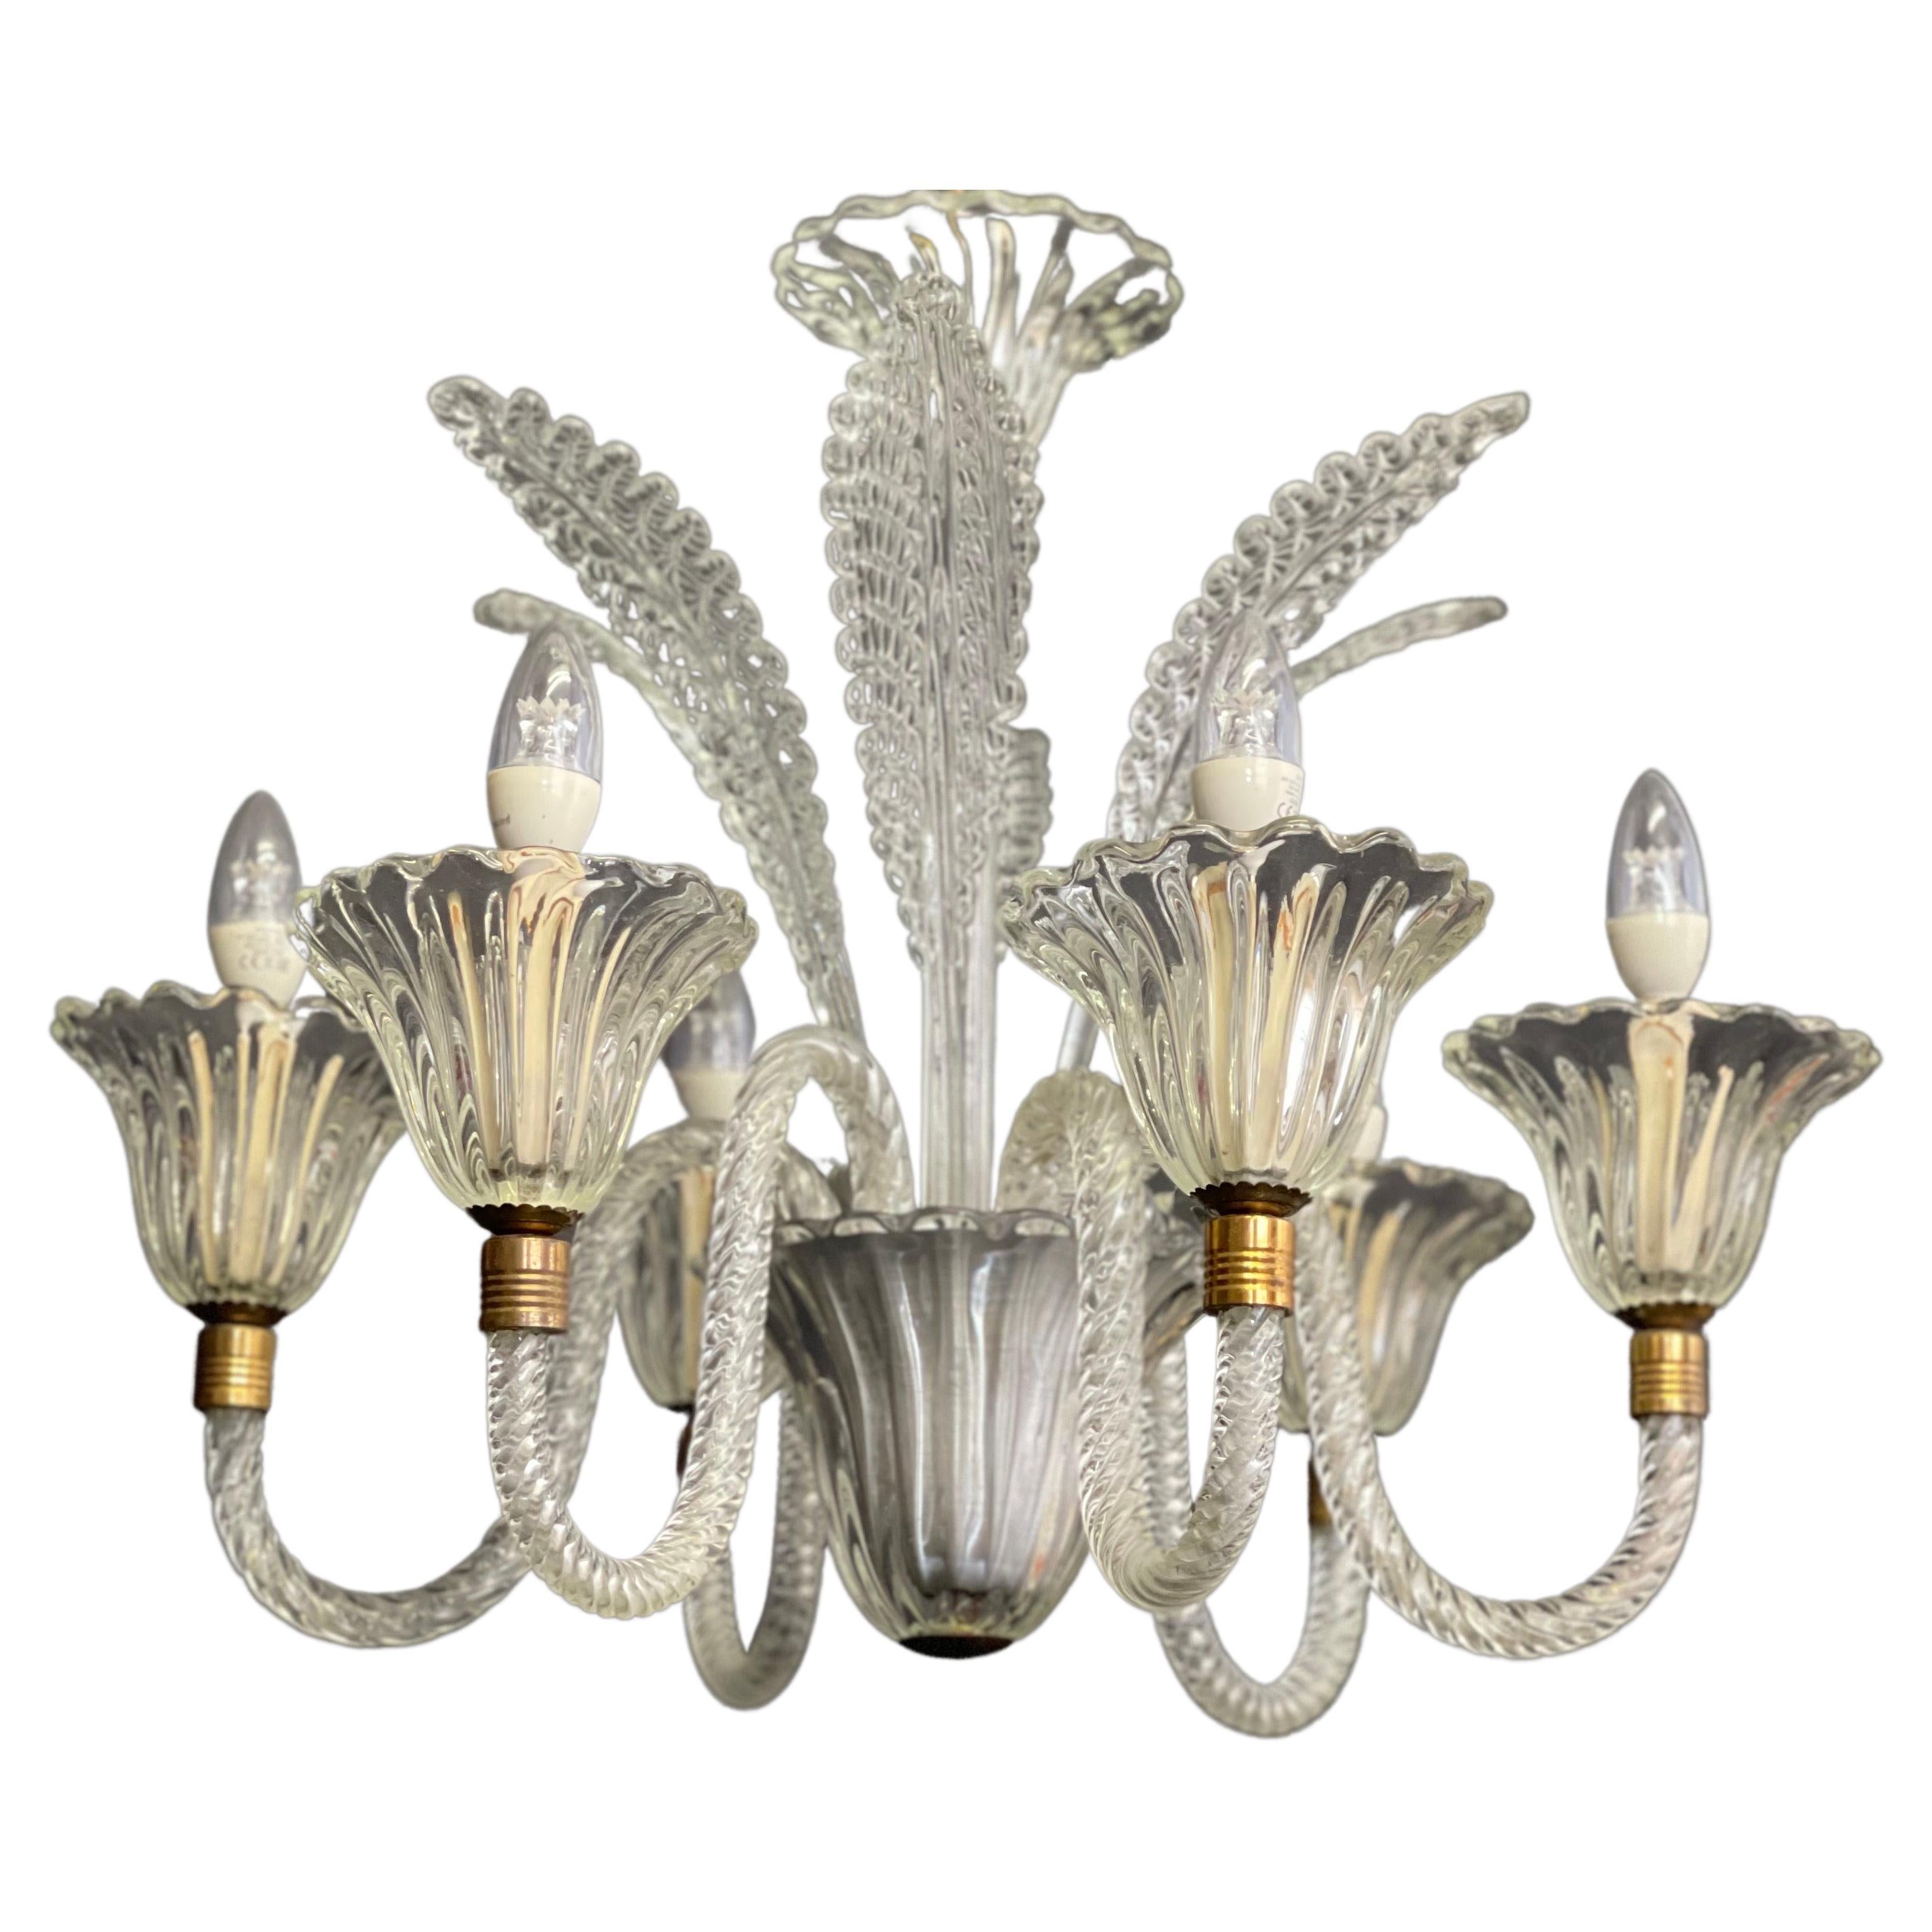 A rare murano glass chandelier by Barovier e Toso, Italy, ca. 1940s.
Newly rewired for US standards.
        